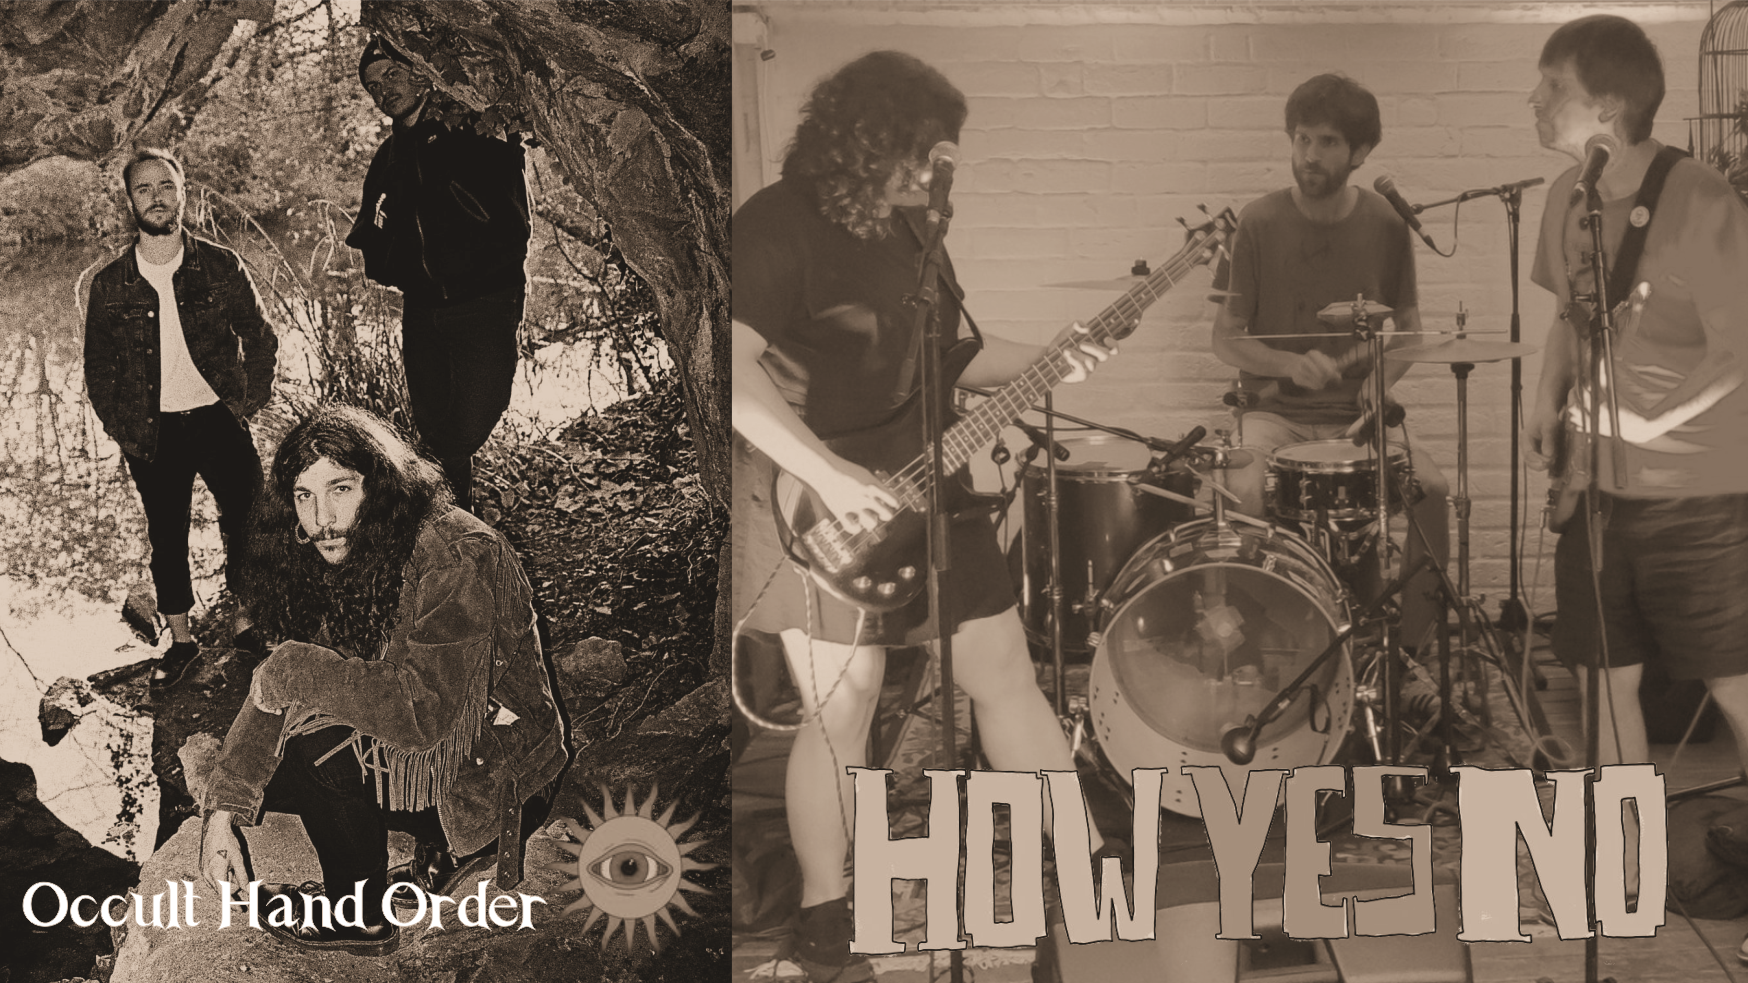 Occult Hand Order (FR) + How Yes No(Zagreb)